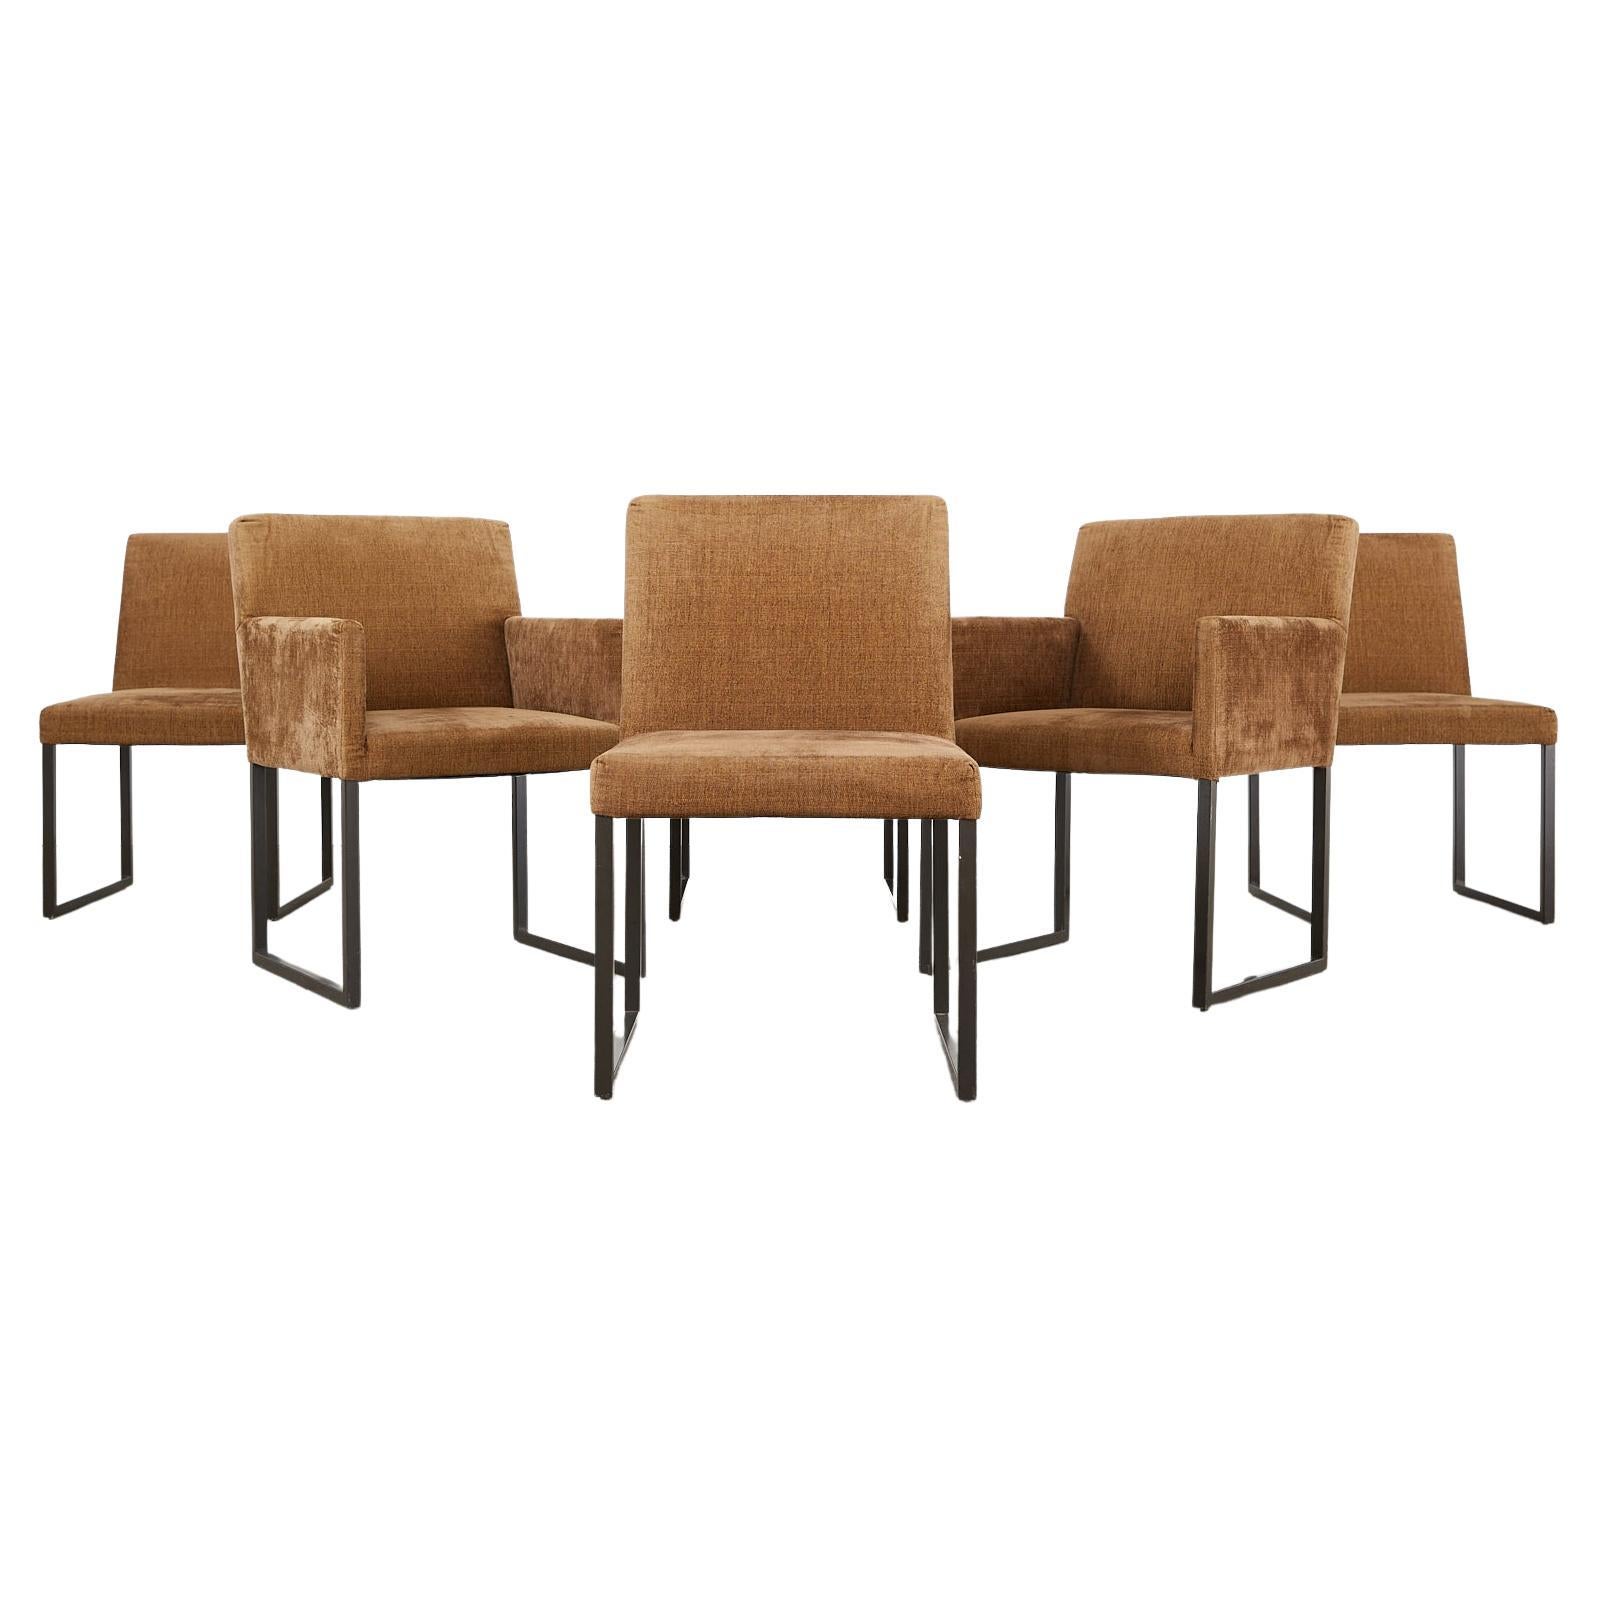 Set of Six Bronzed Steel Sled Style Dining Chairs For Sale